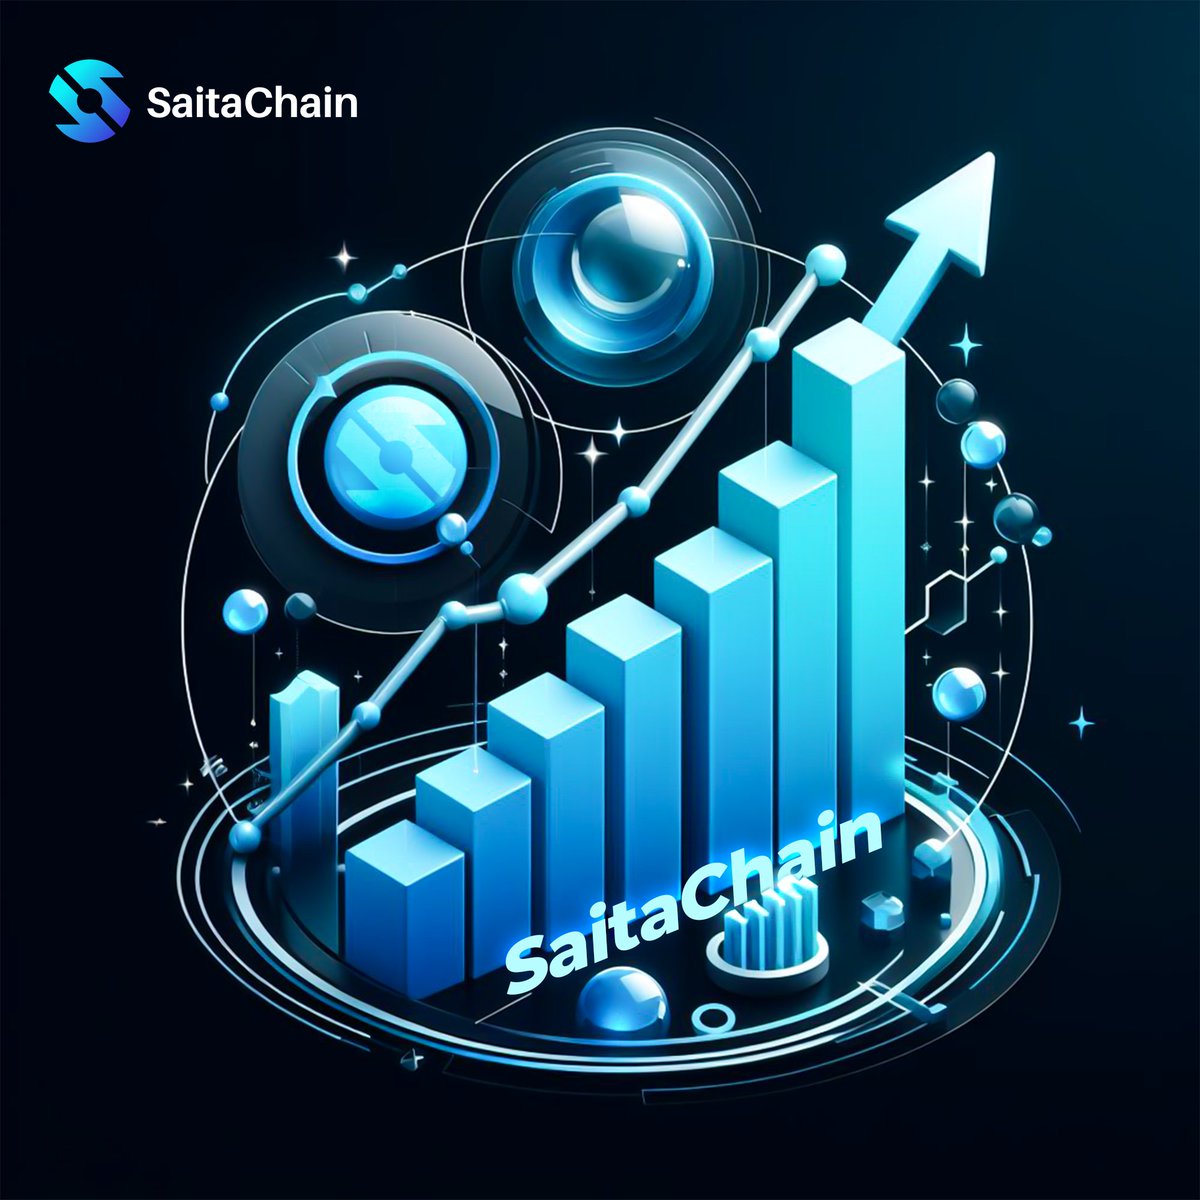 #SaitaChain is where patience will pay off big time! 📈 Been in since January and I'm loving the vision and vibes so far ♥️ Plus, everything is out there for everyone to see on @saitachaincoin ✅ It's certain that there's a different level of excitement in each passing month 🔥